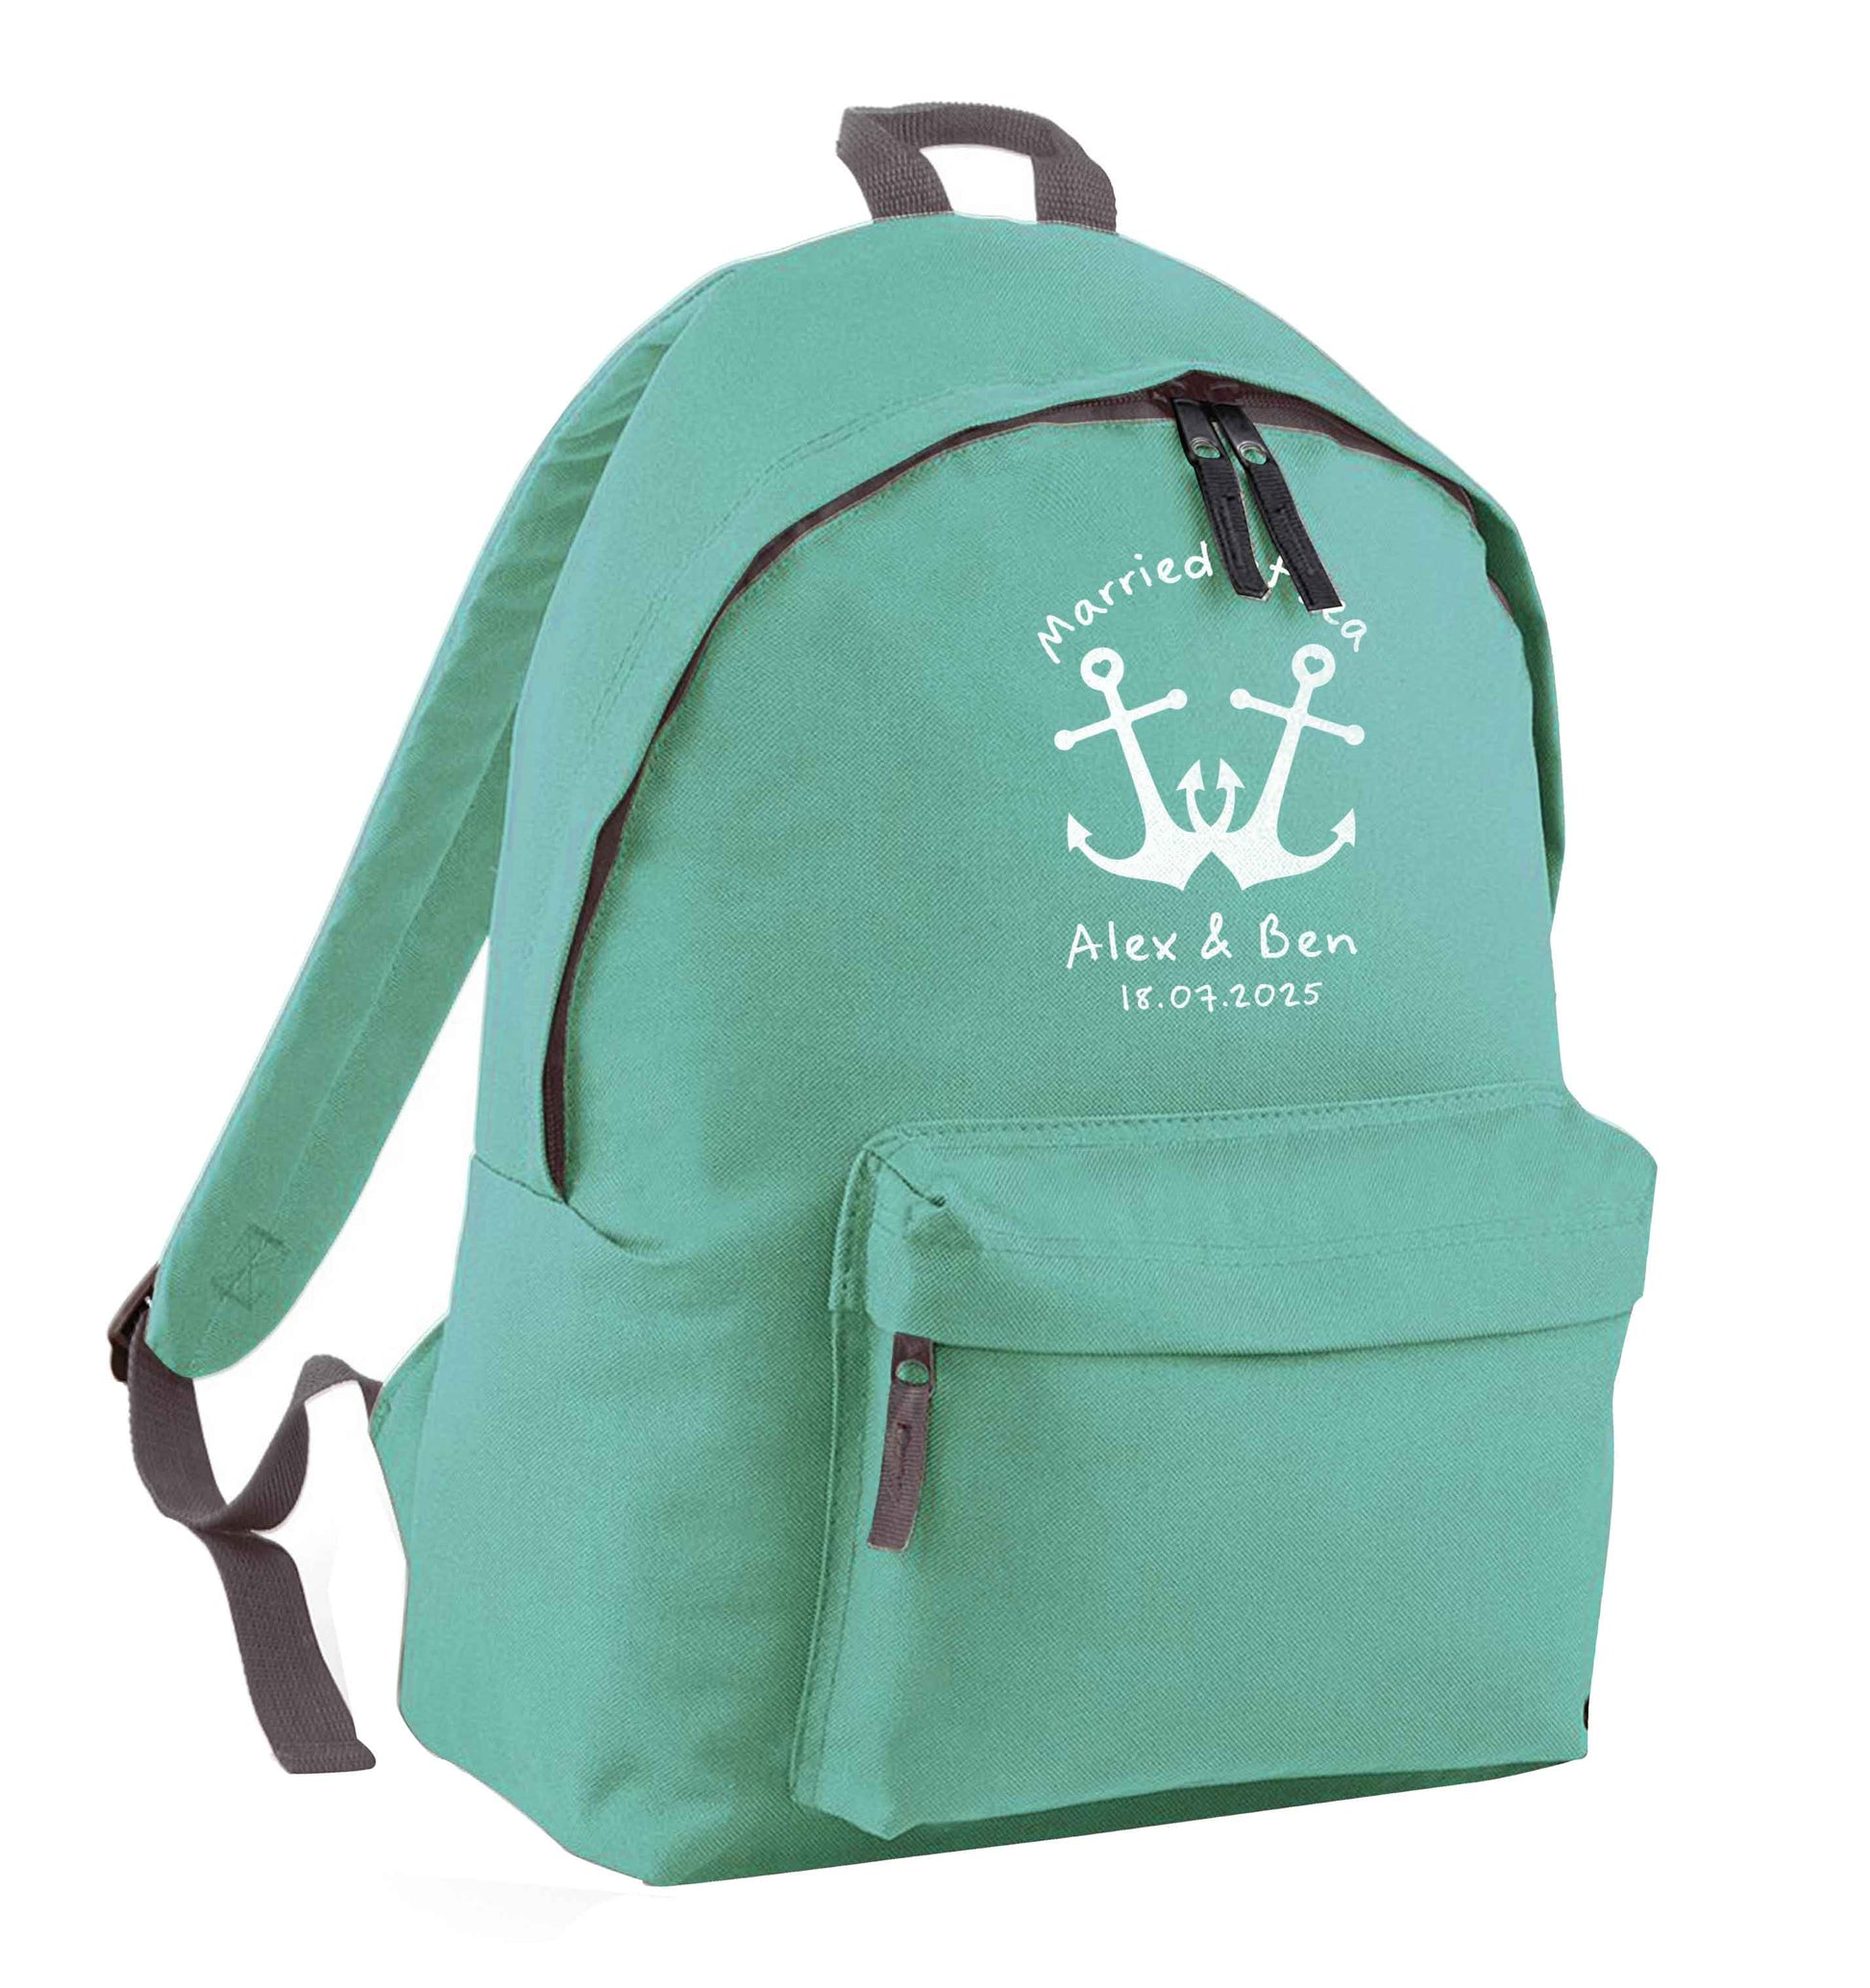 Married at sea blue anchors mint adults backpack